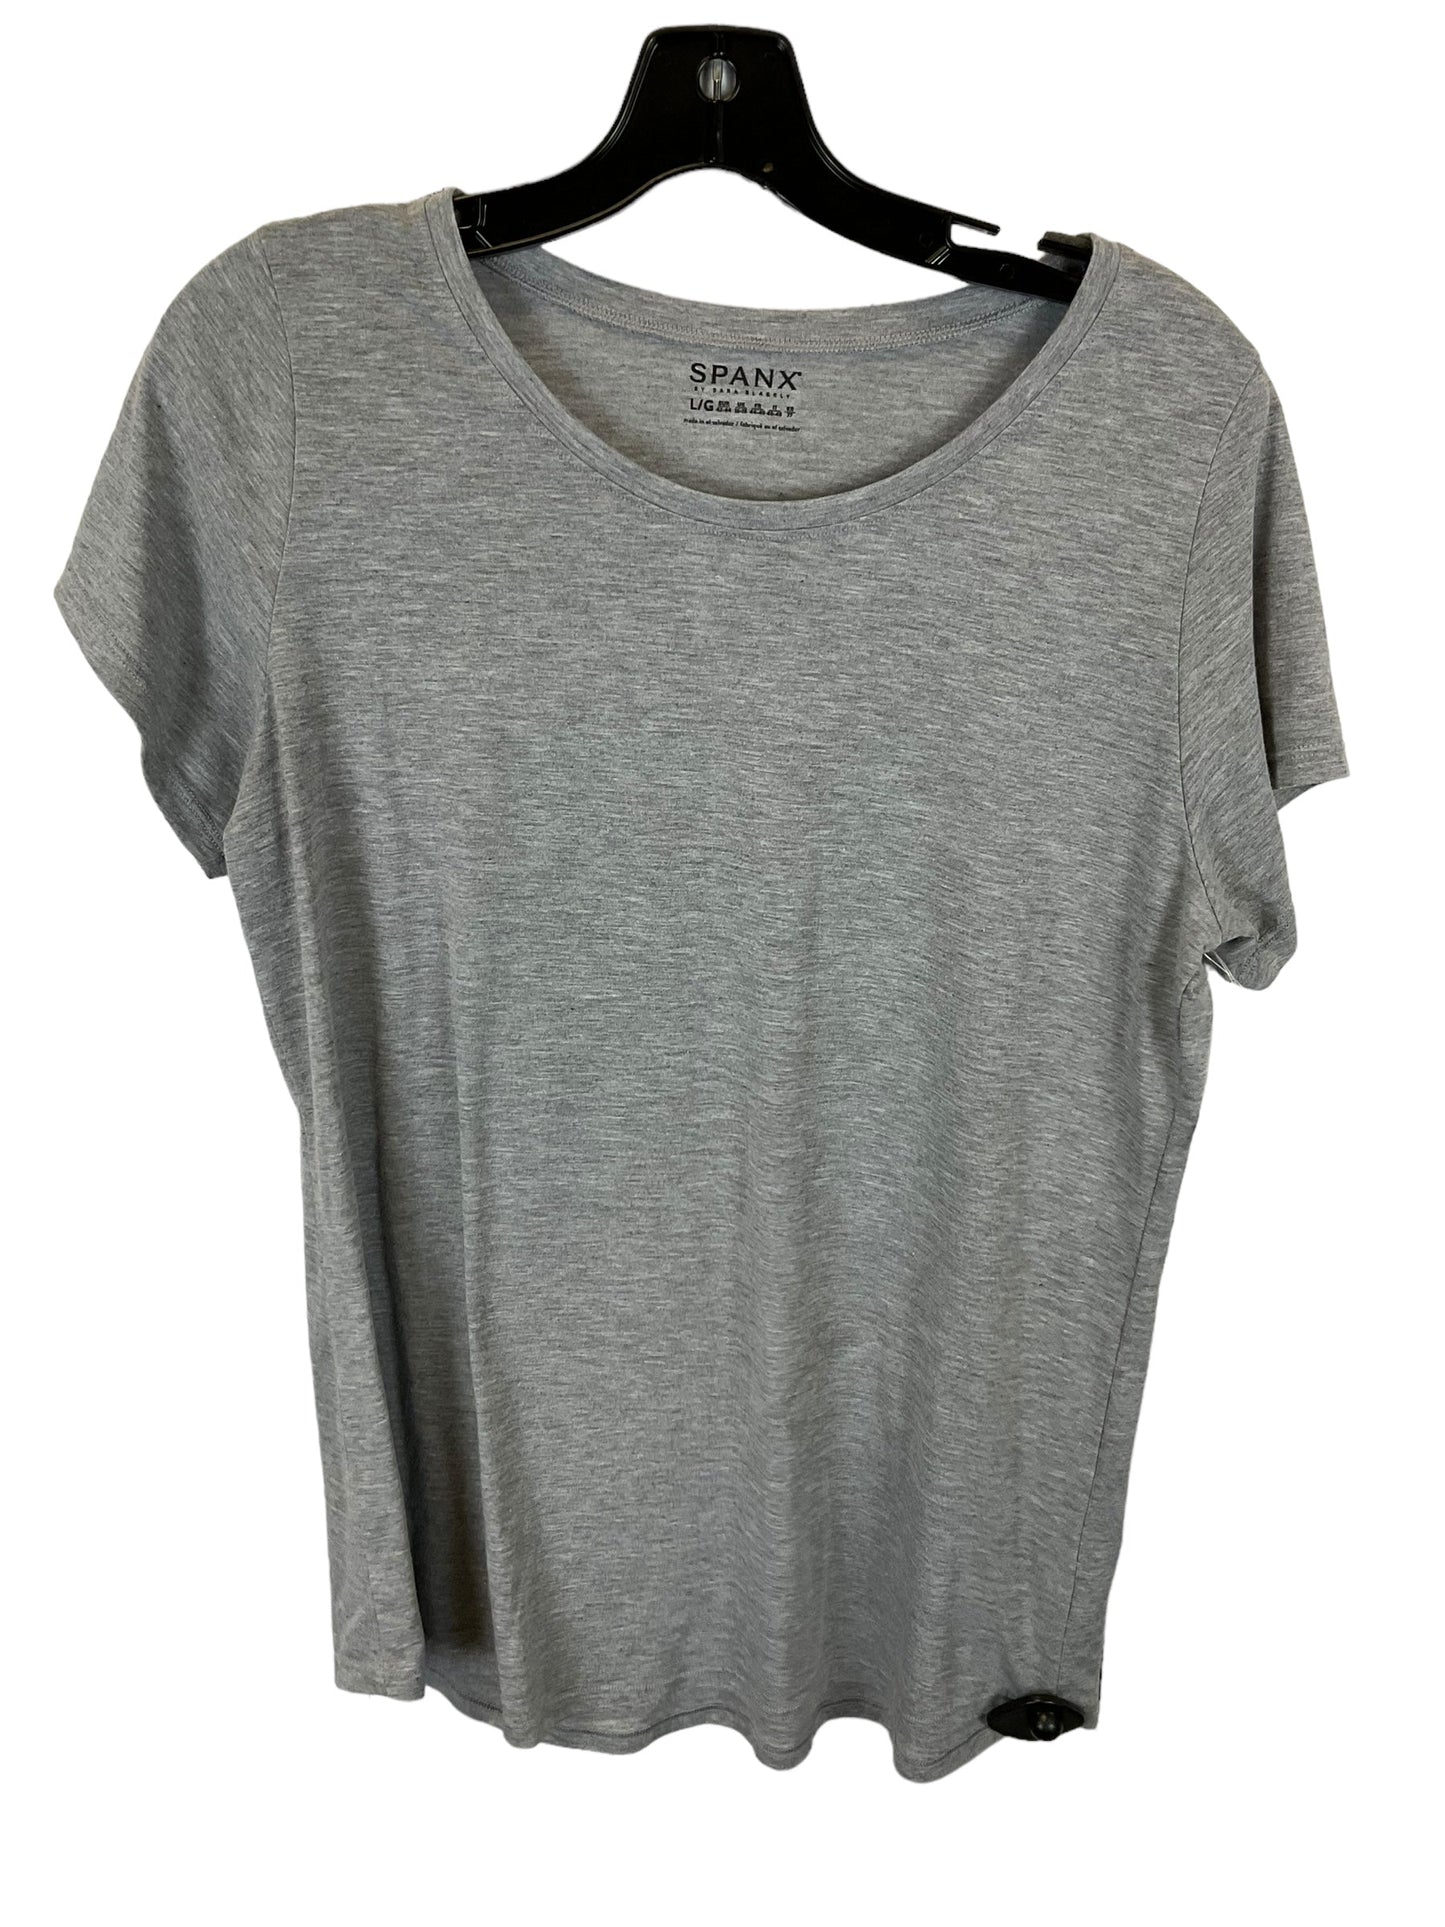 Grey Top Short Sleeve Spanx, Size L